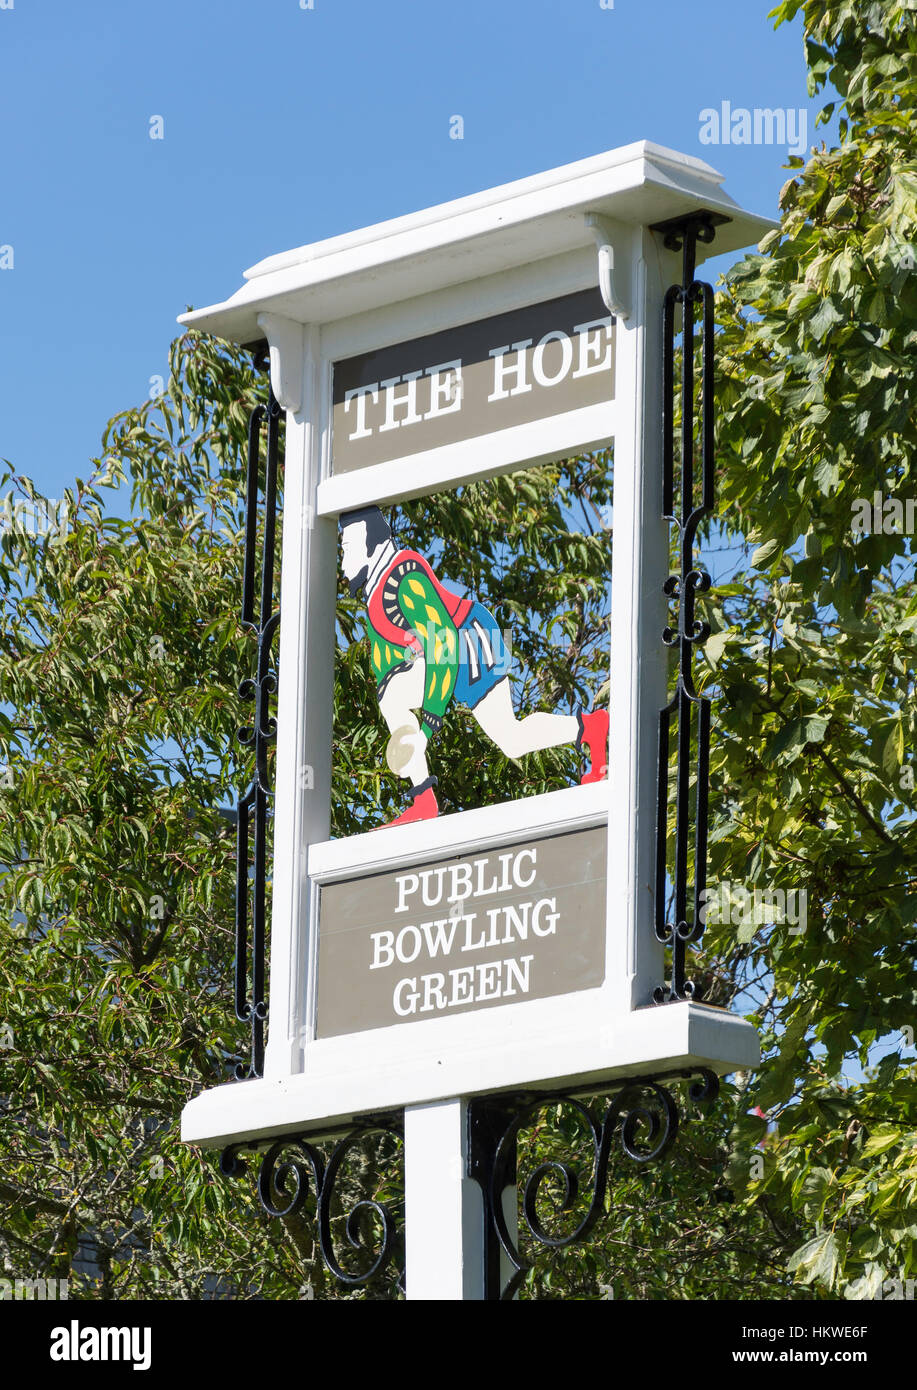 The Hoe Public Bowling Club sign, Plymouth Hoe, Plymouth, Devon, England, United Kingdom Stock Photo